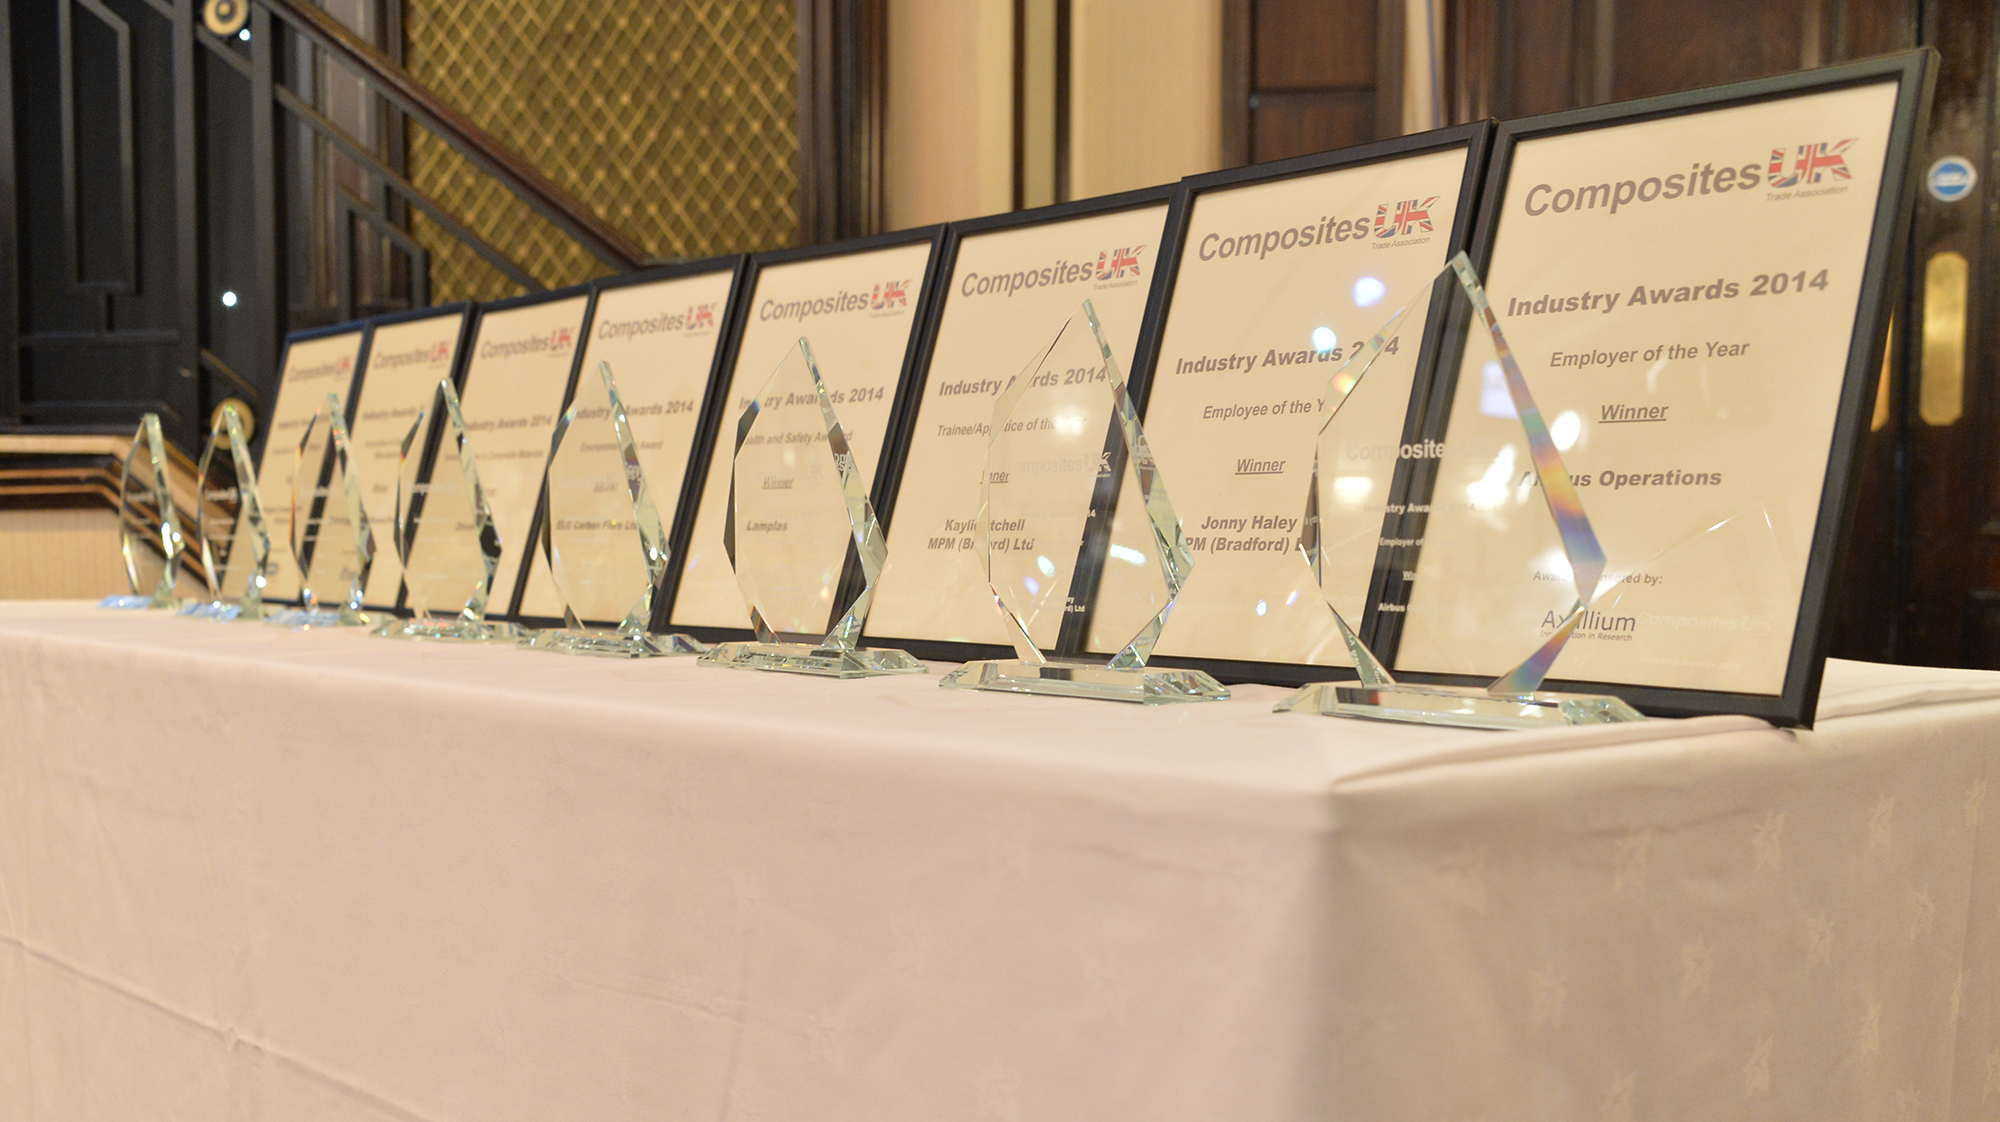 The awards are presented in eight categories.